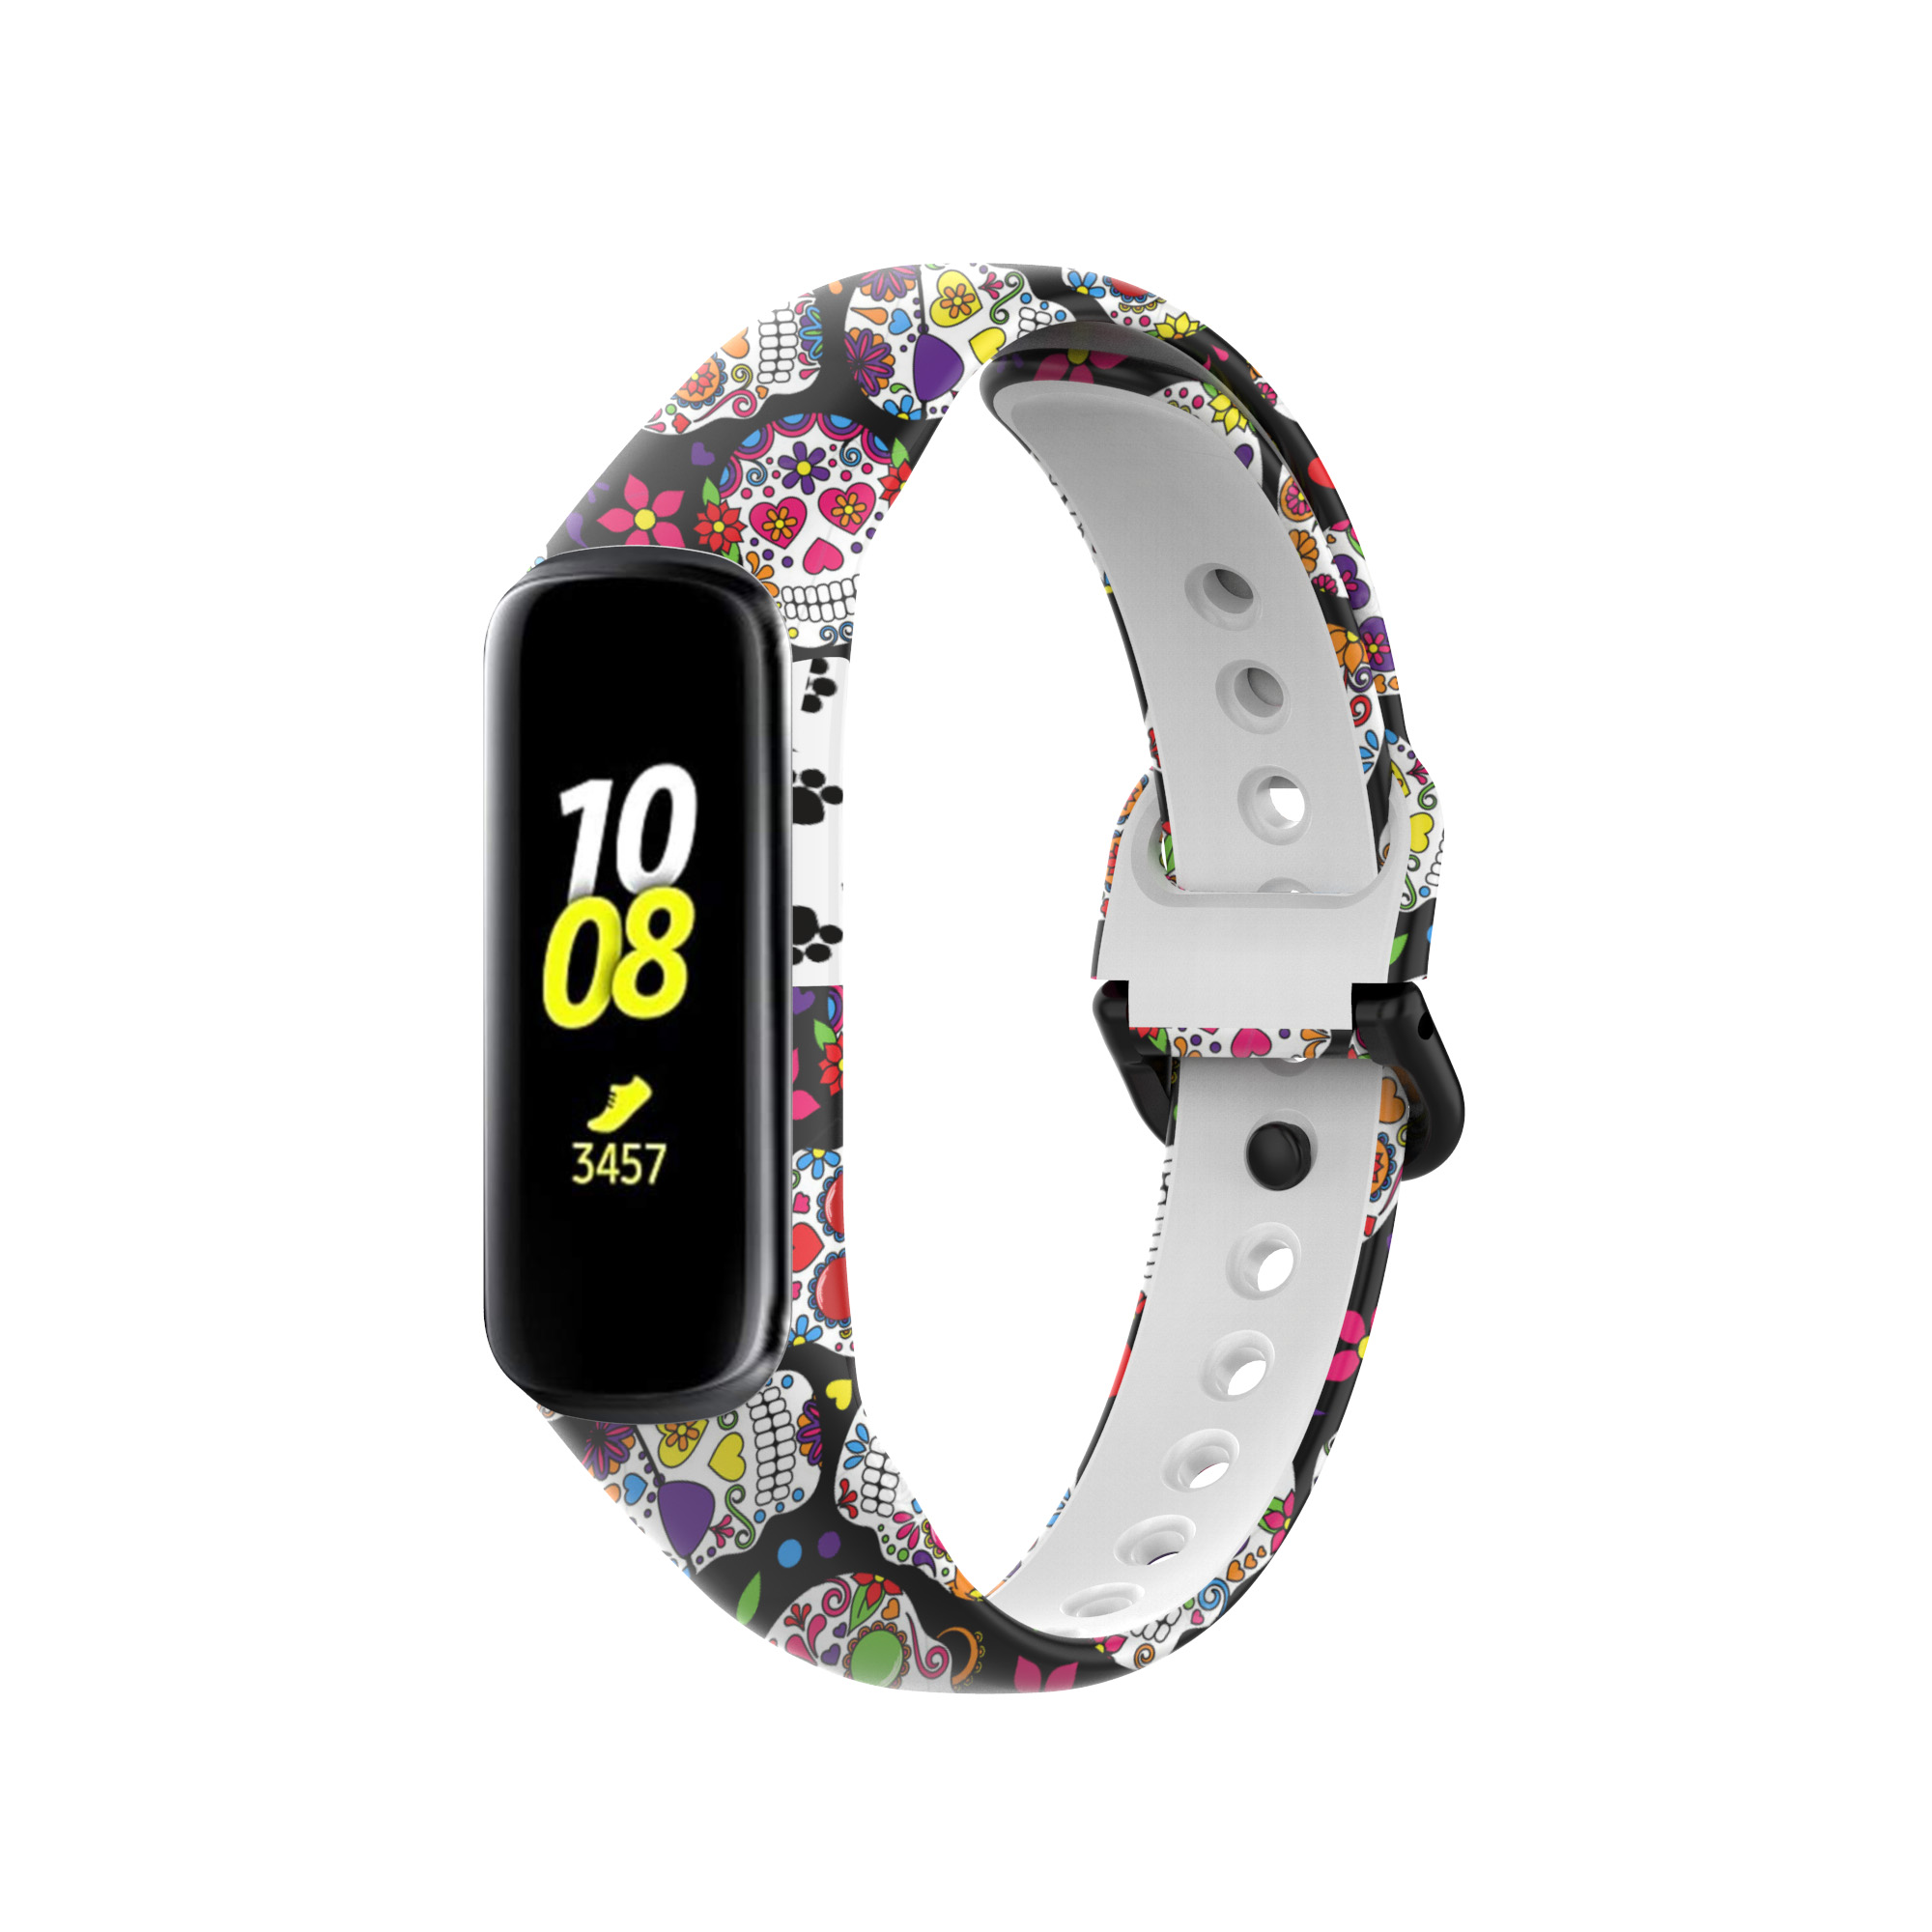 Bakeey-Printed-Pattern-Stainless-Steel-Buckle-Smart-watch-Band-Replacement-Strap-For-Samsung-Galaxy--1806217-29